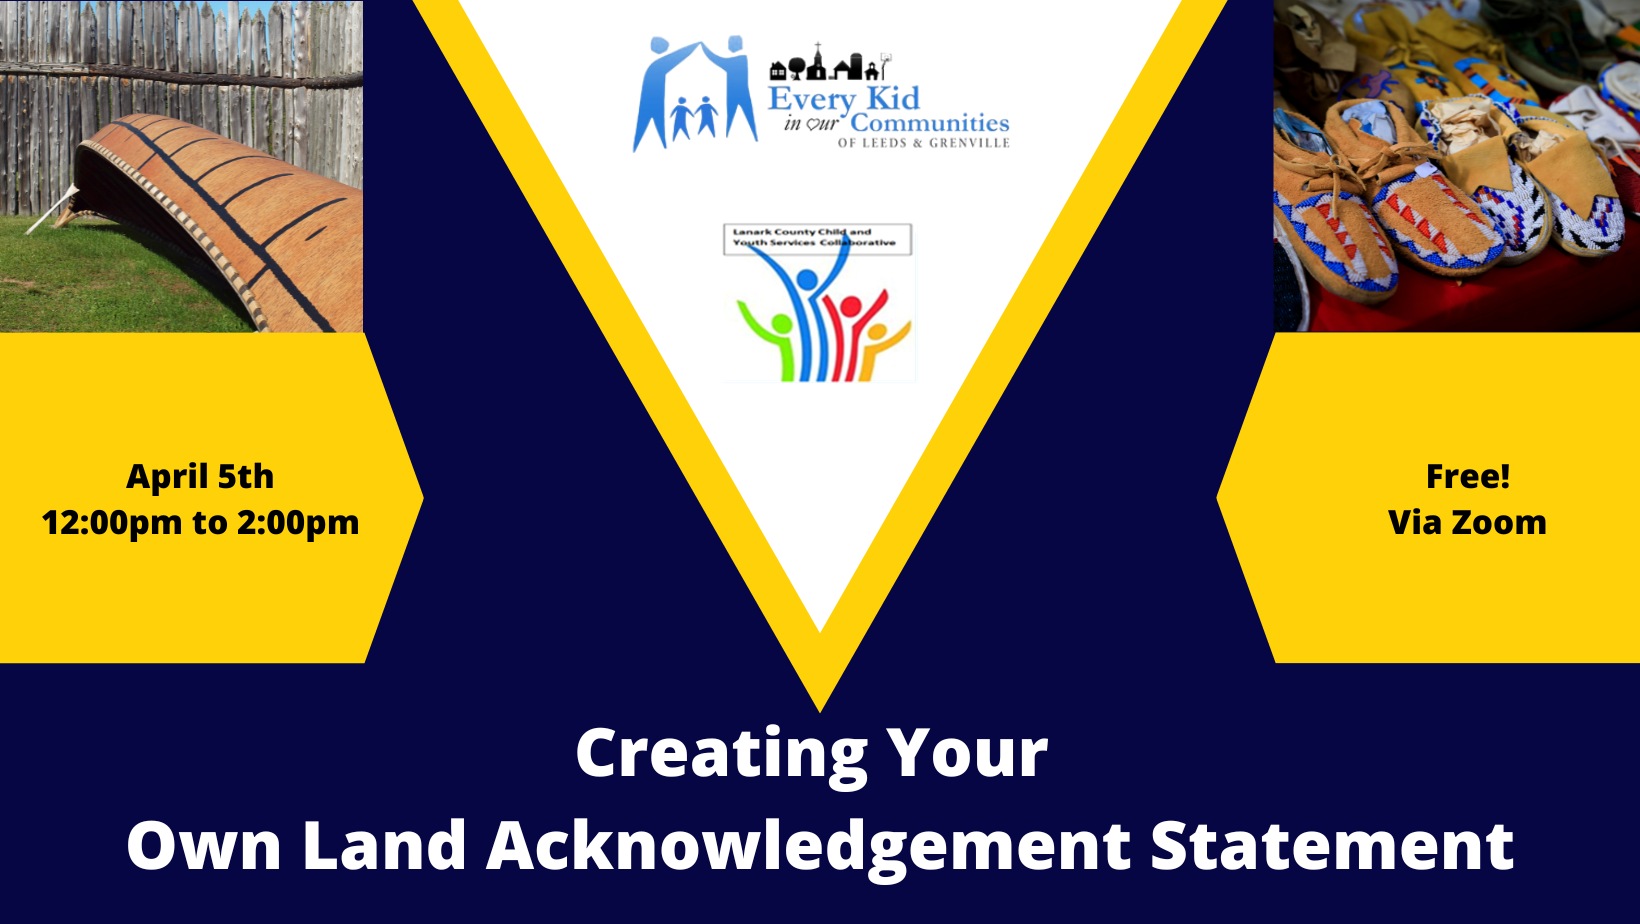 Realize how you got to where you are now, and will enable you to create your own authentic Land Acknowledgement Statement.